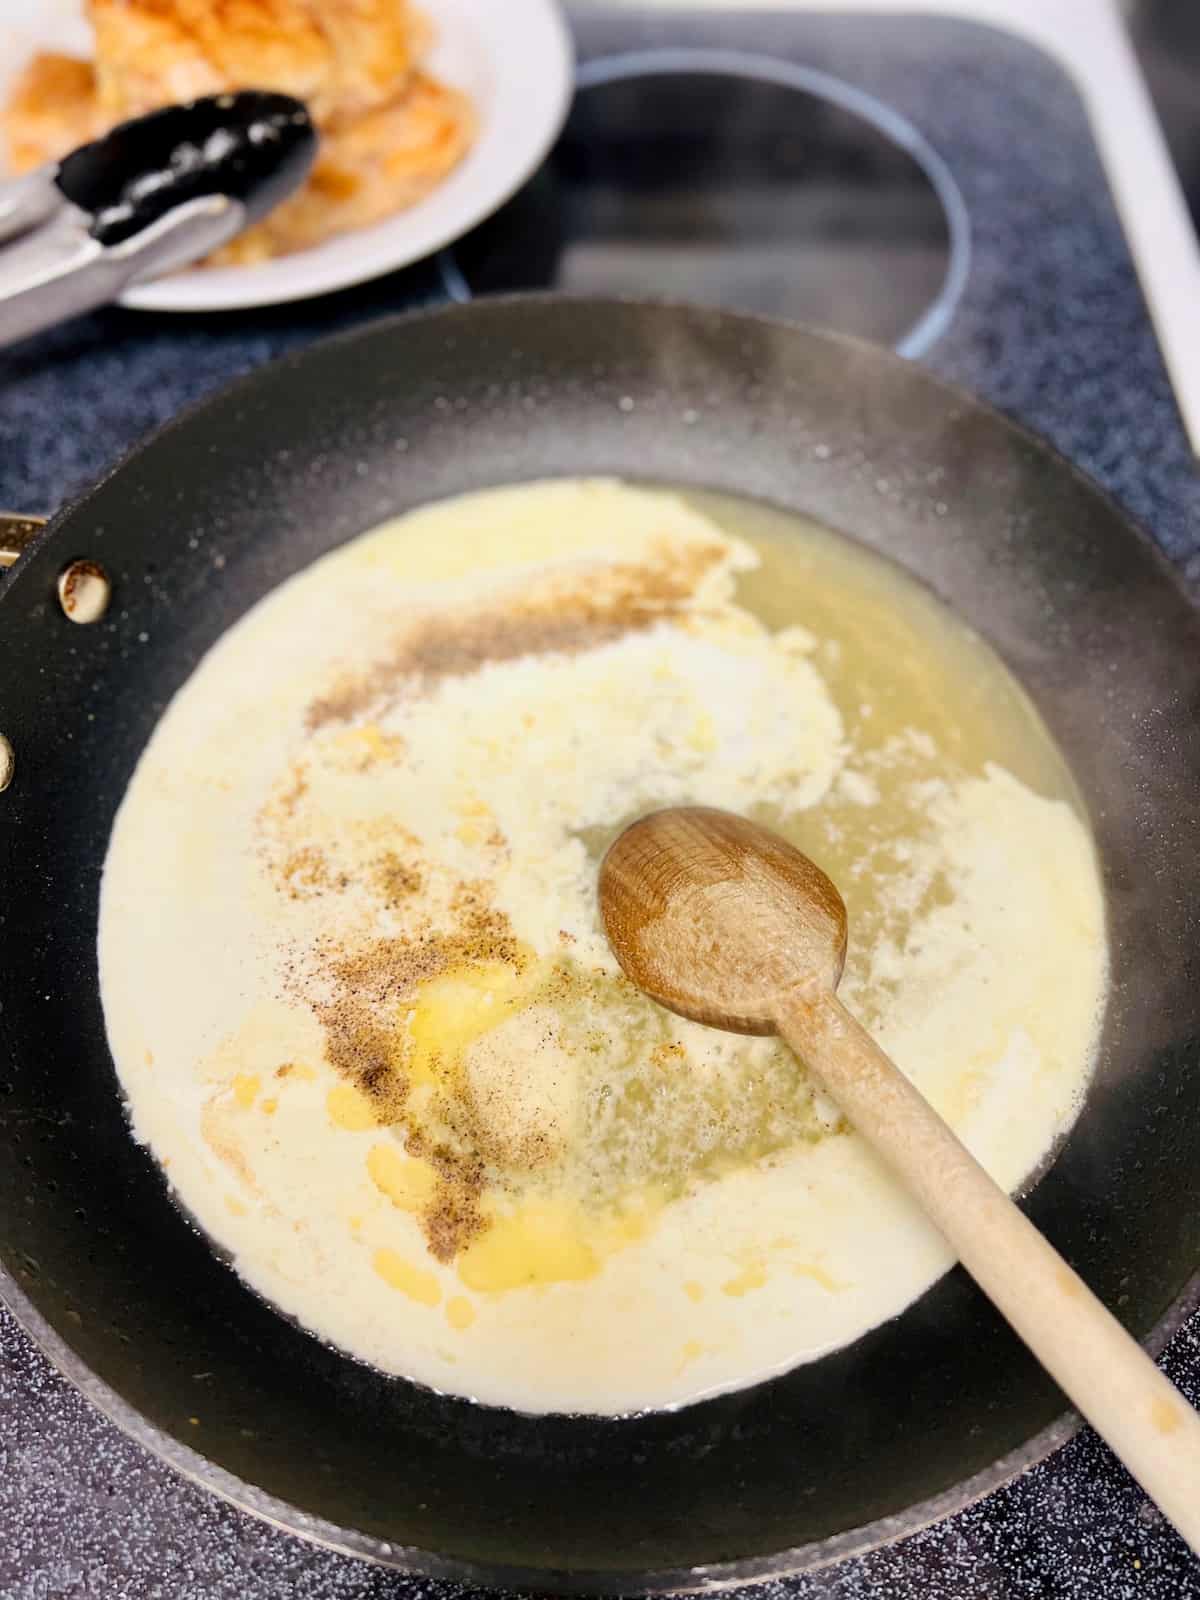 Adding butter and ingredients to skillet.